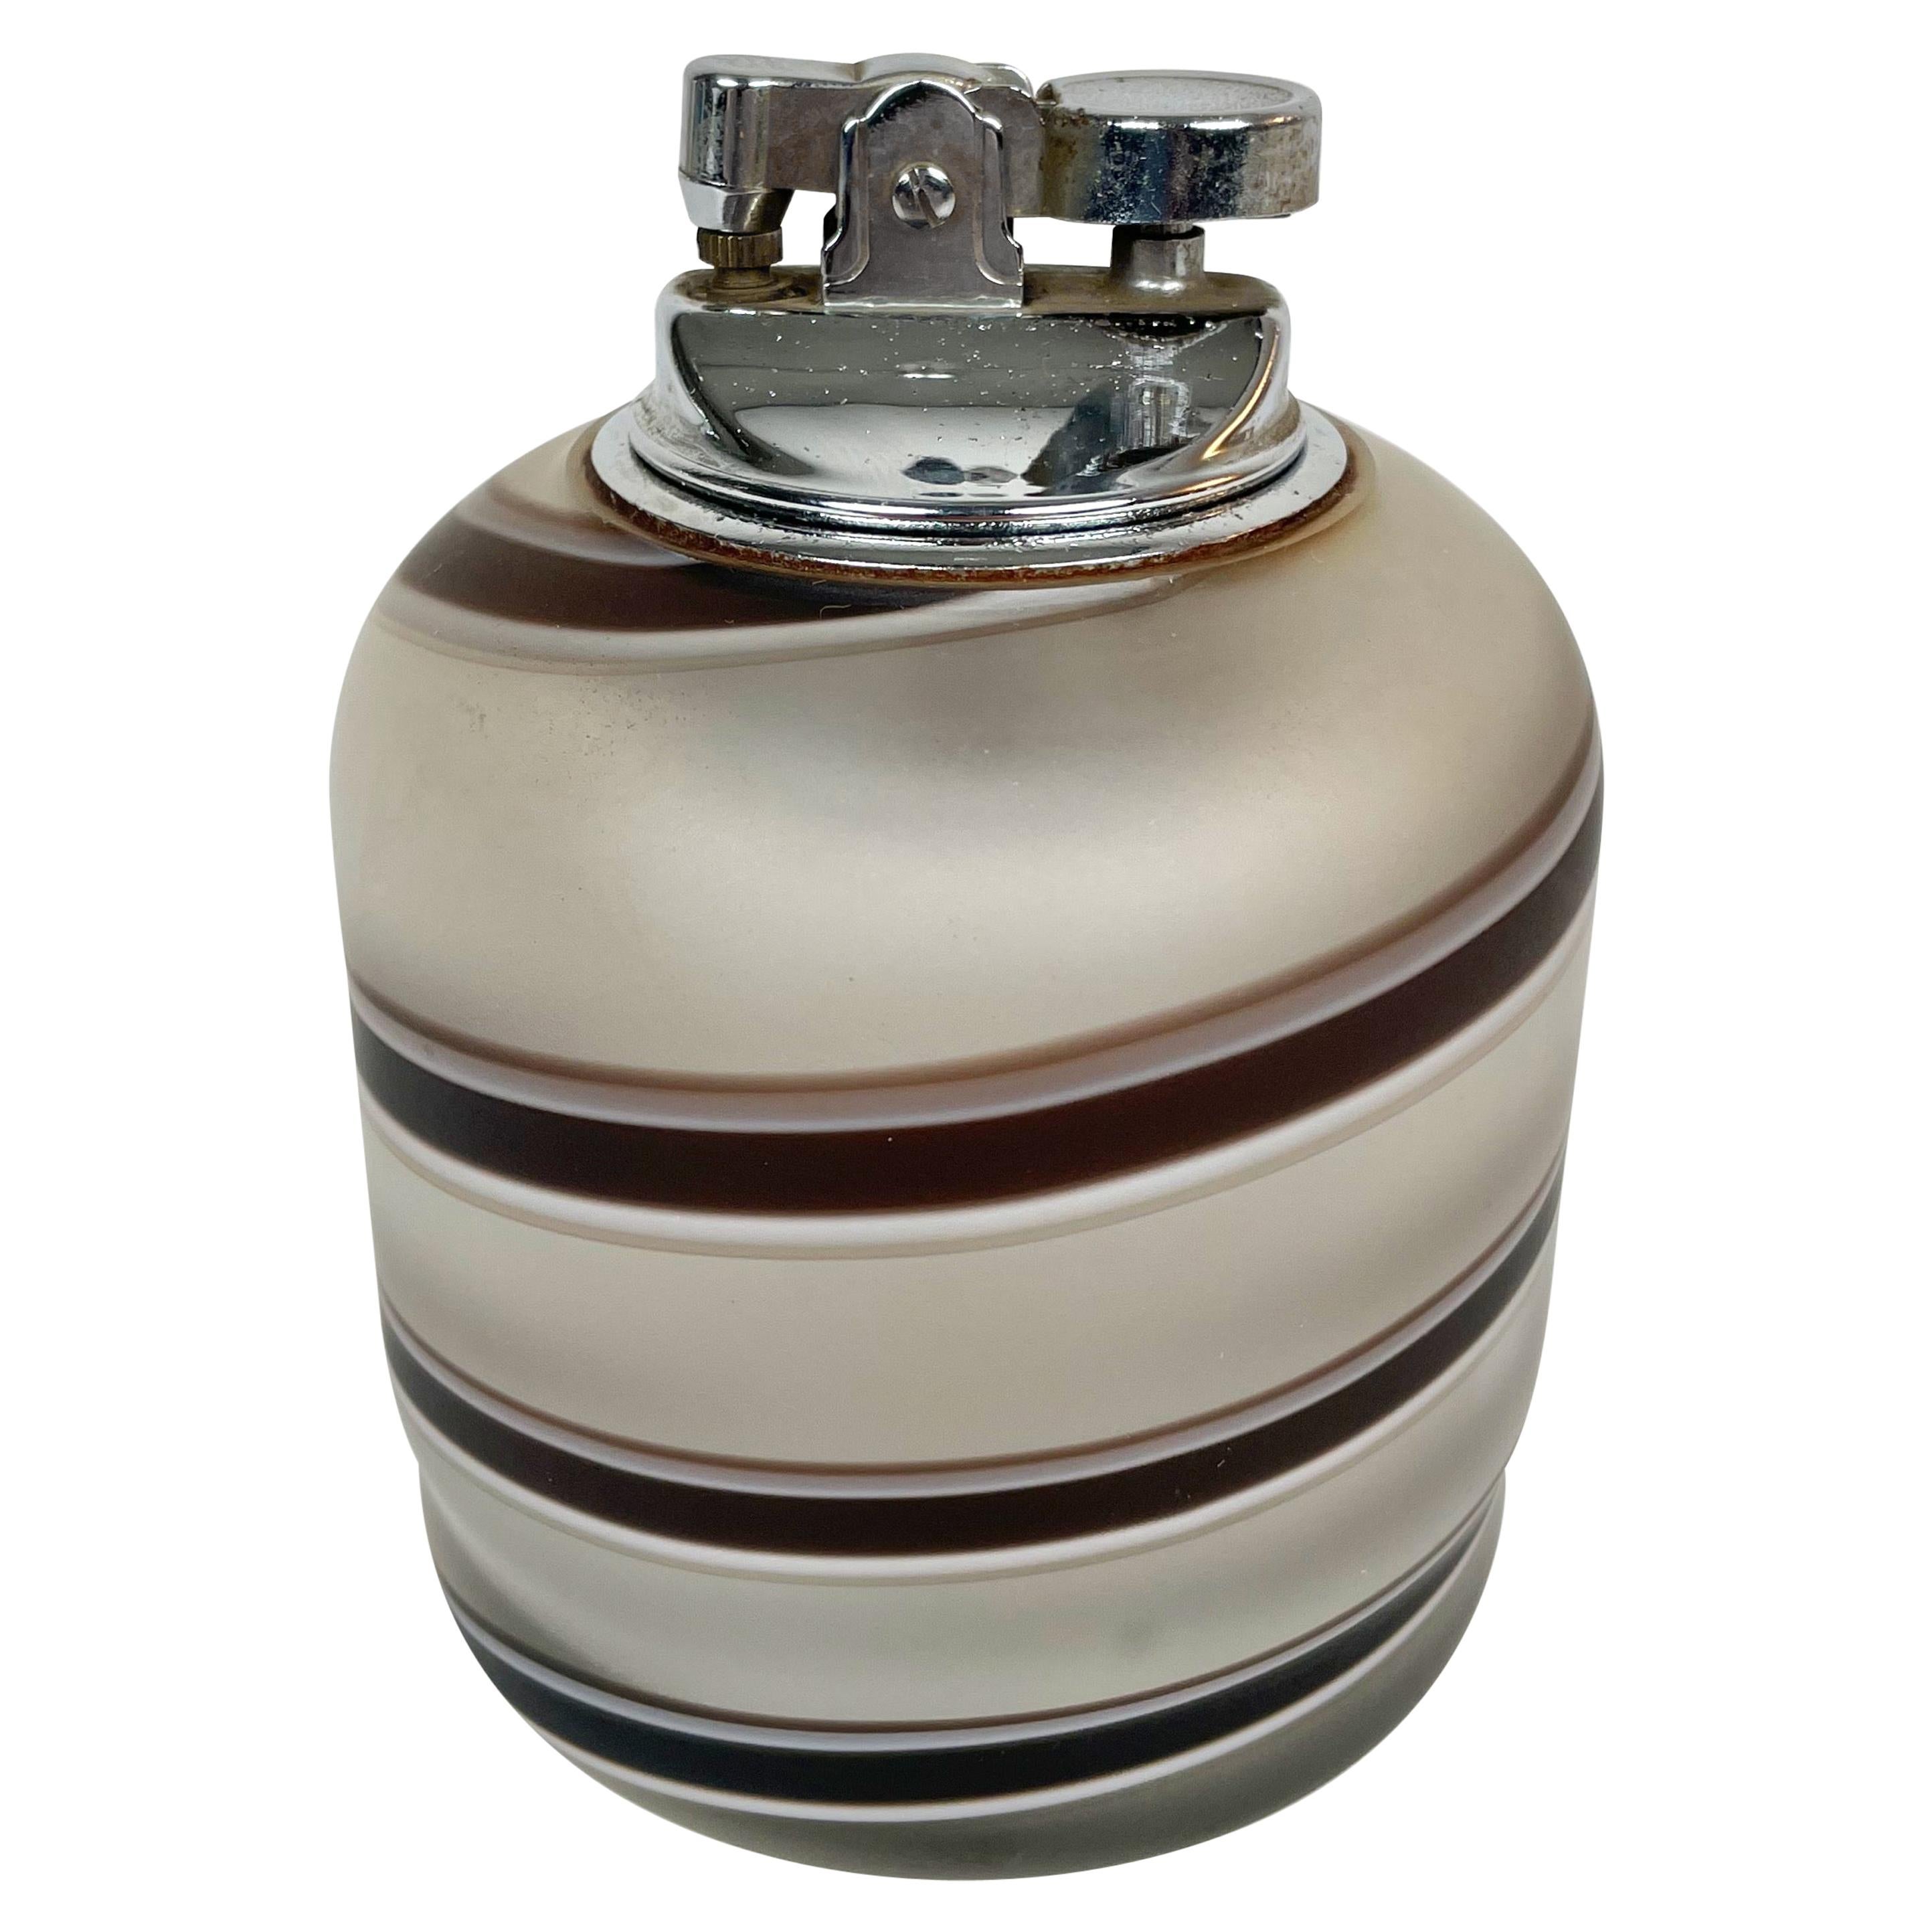 Tommaso Barbi Table Lighter in Murano Glass, Italy, 1970s For Sale